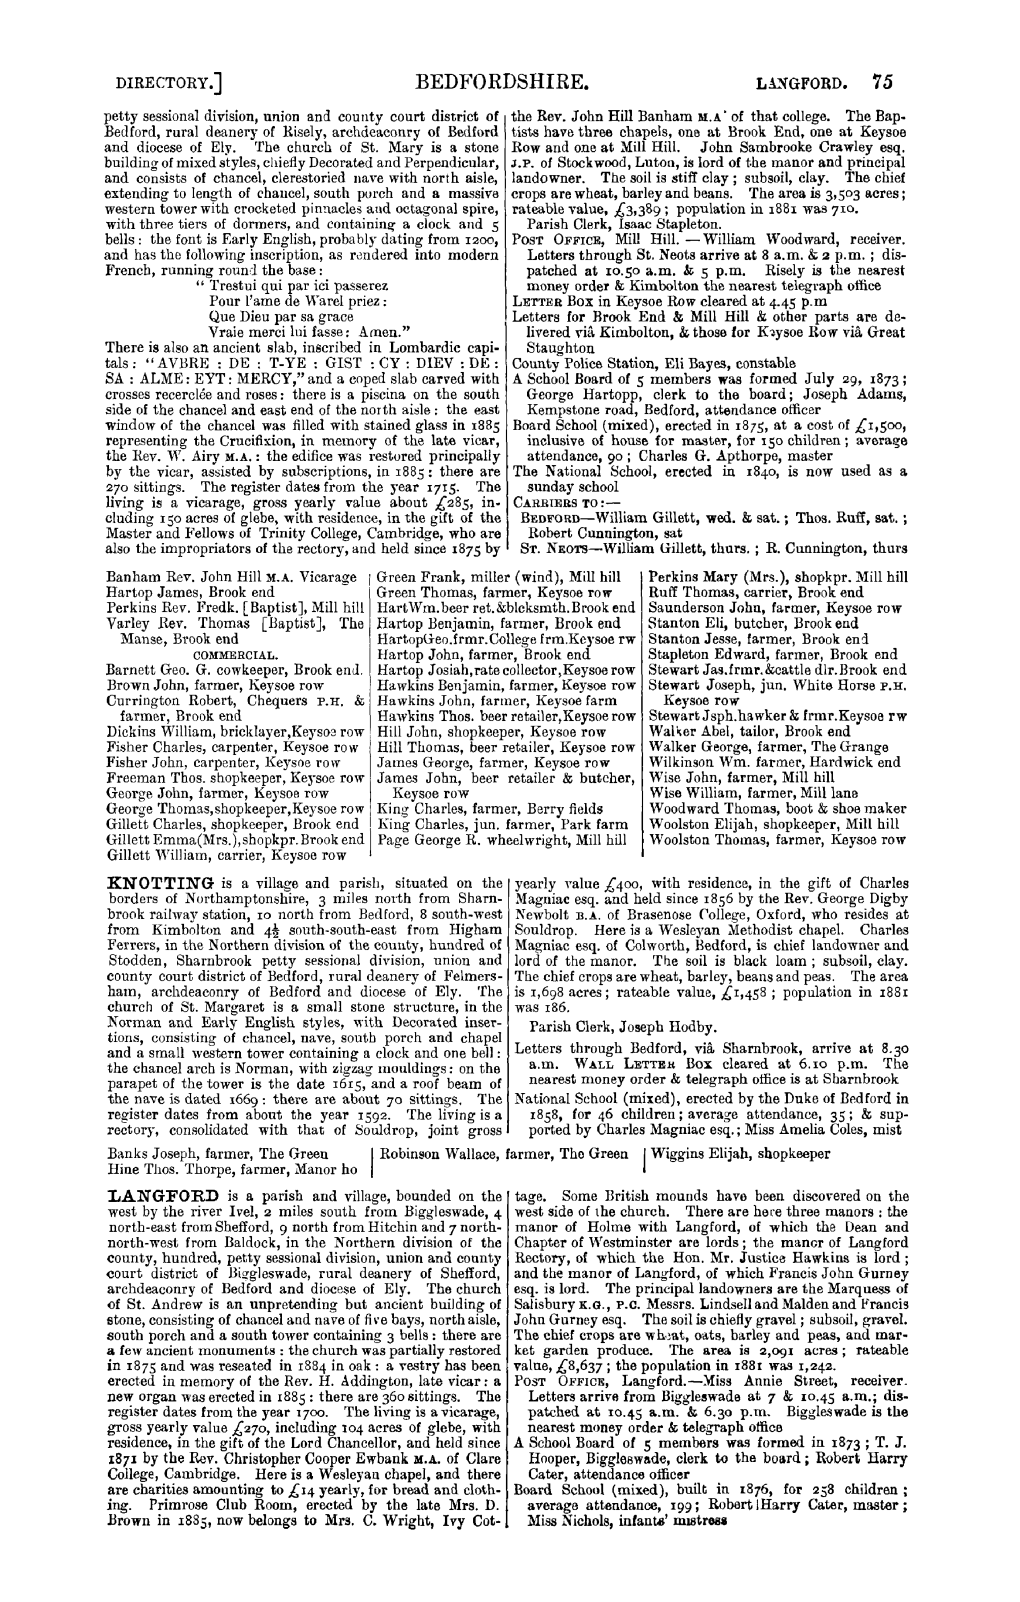 BEDFORDSHIRE. "15 Petty Sessional Division, Union and County Court District of the Rev